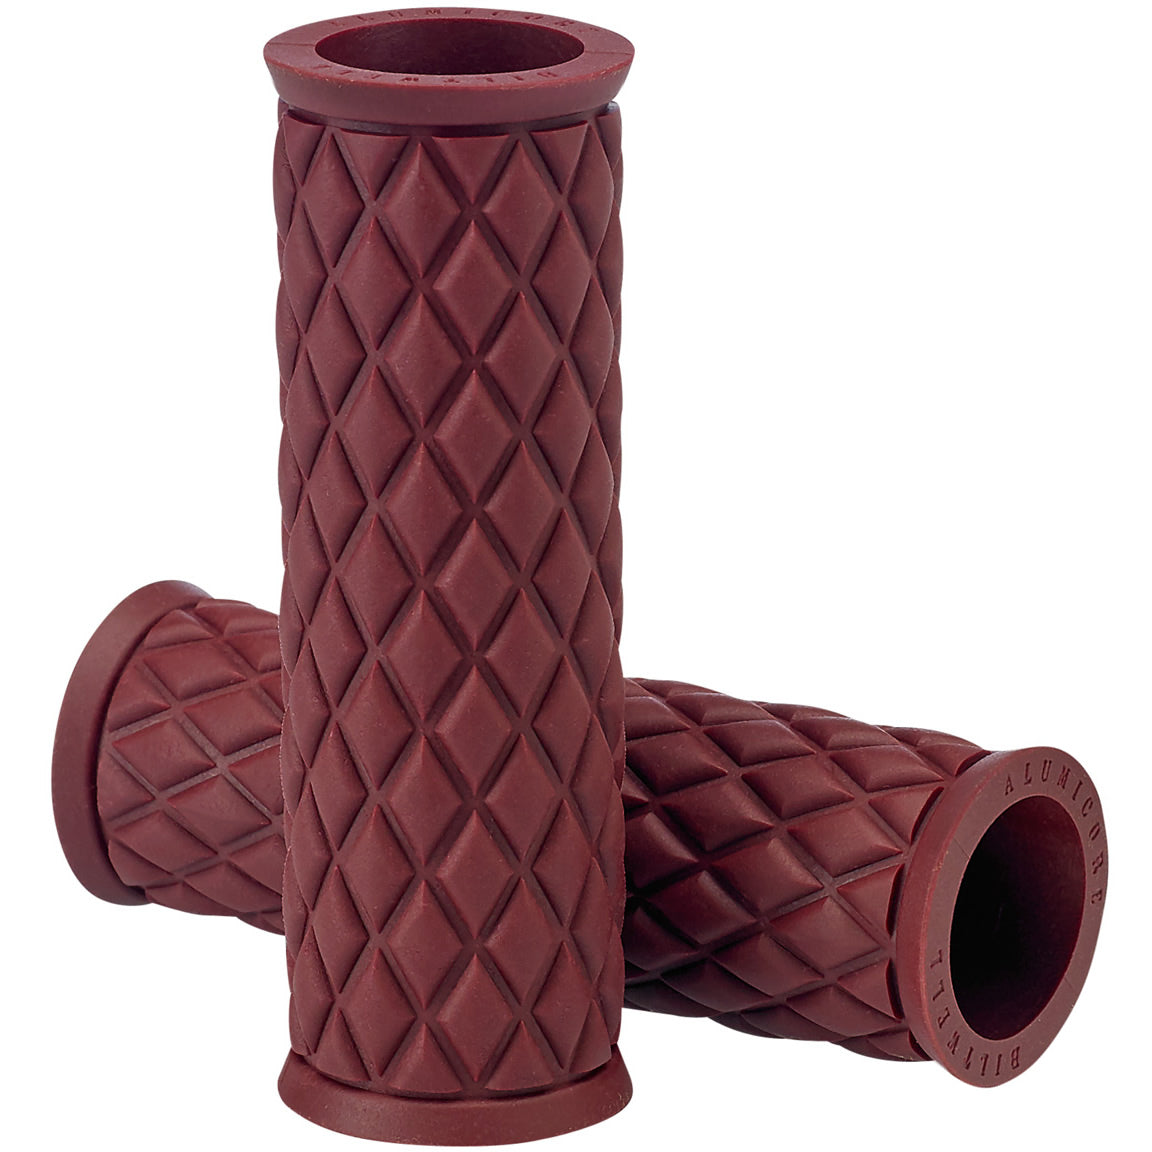 AlumiCore Replacement Sleeves - Oxblood